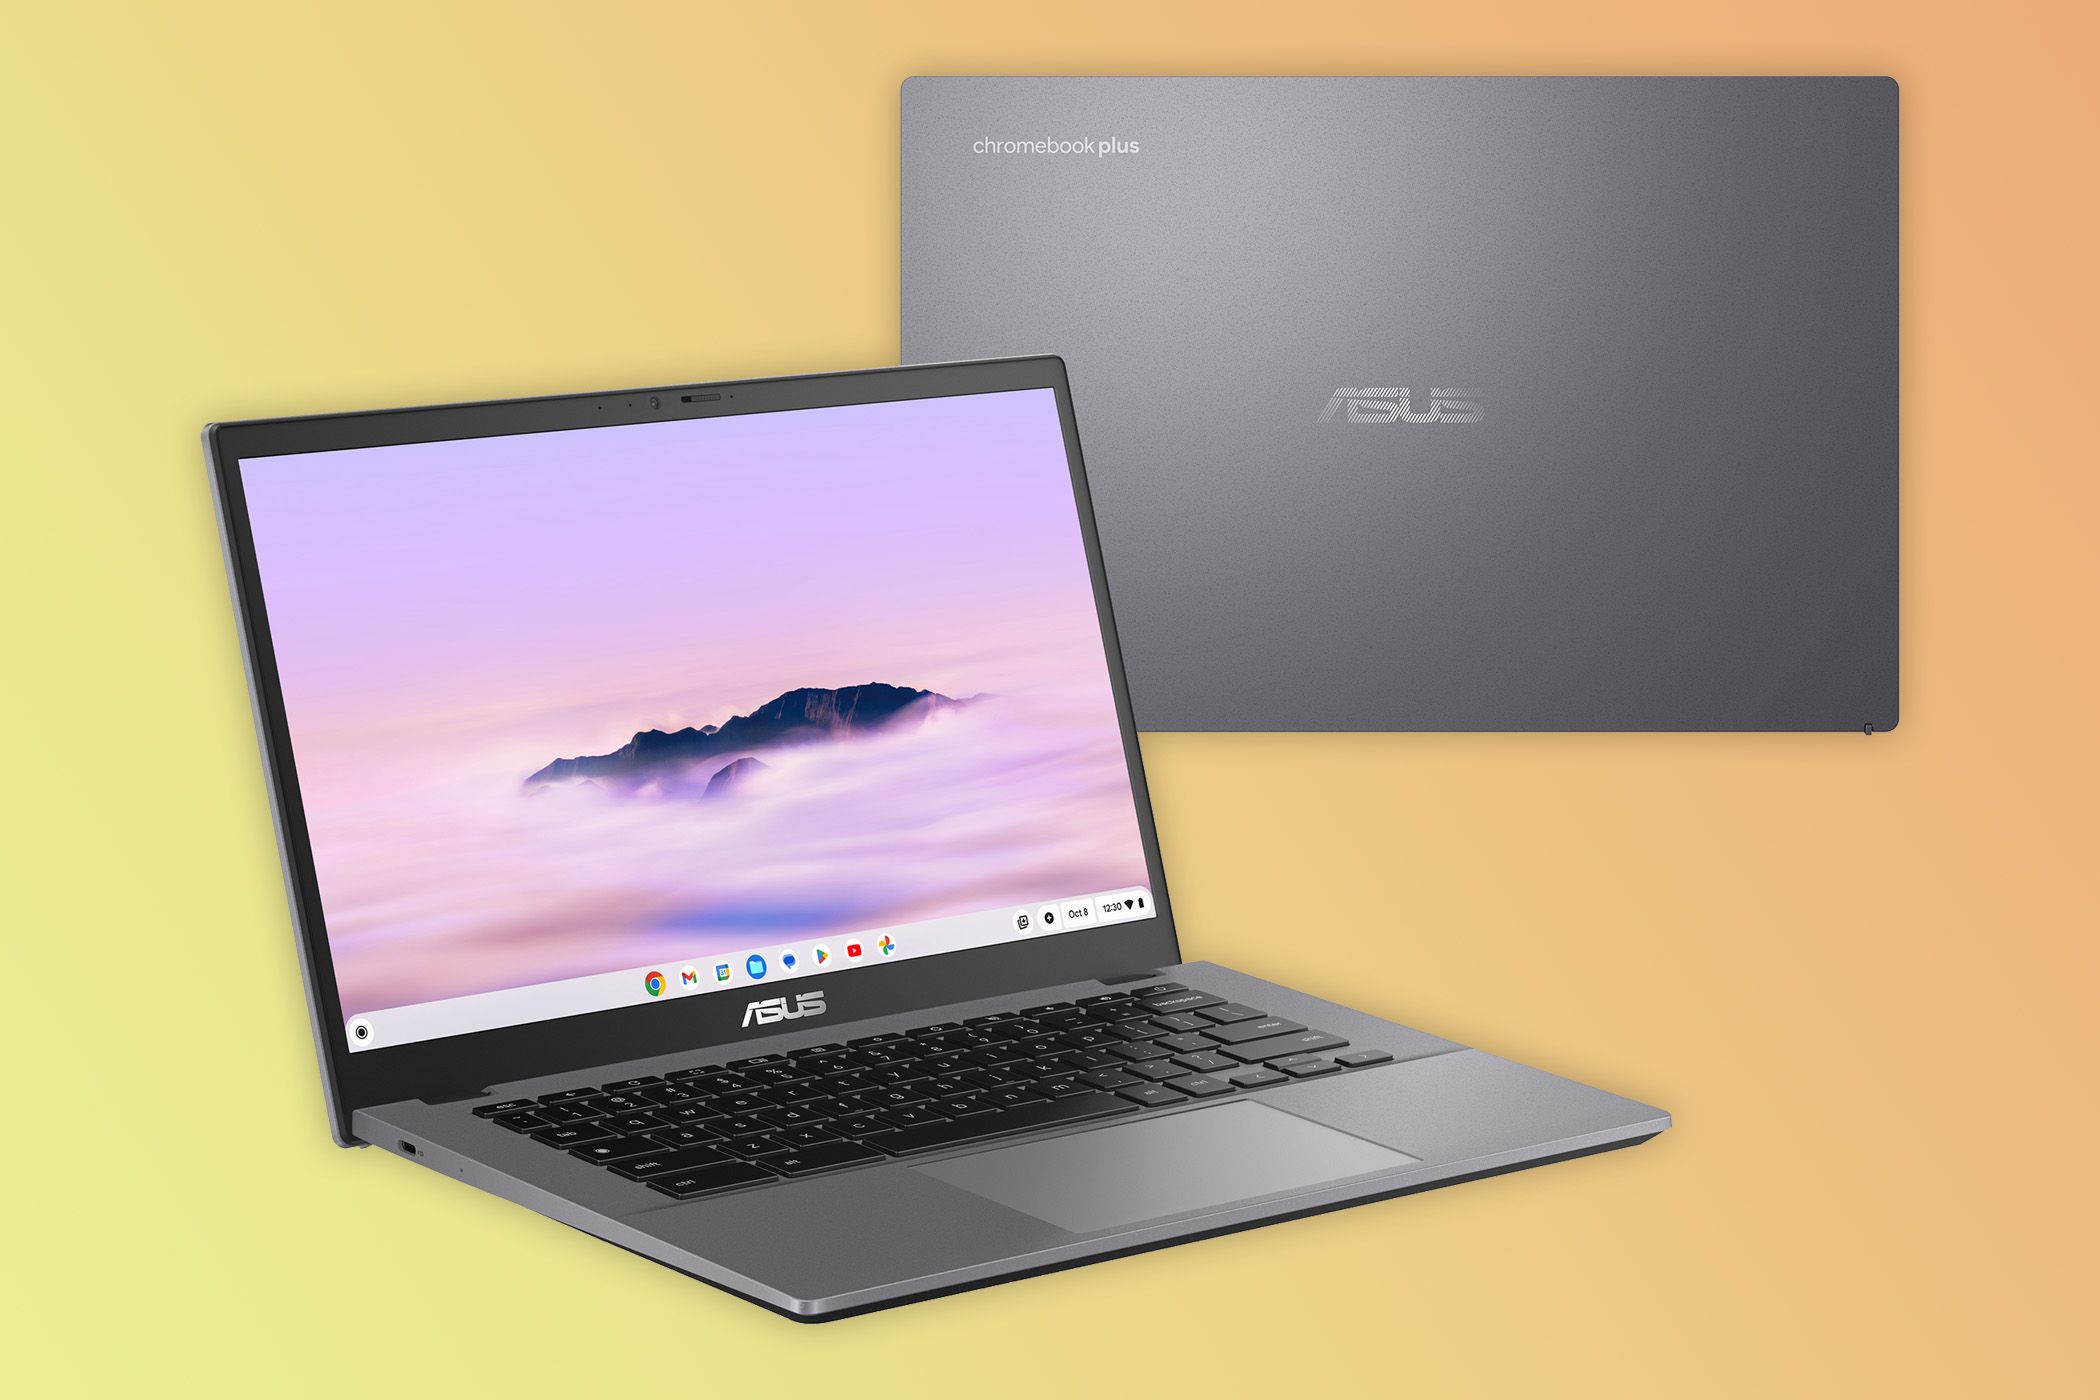 What Is a Chromebook Plus Laptop?